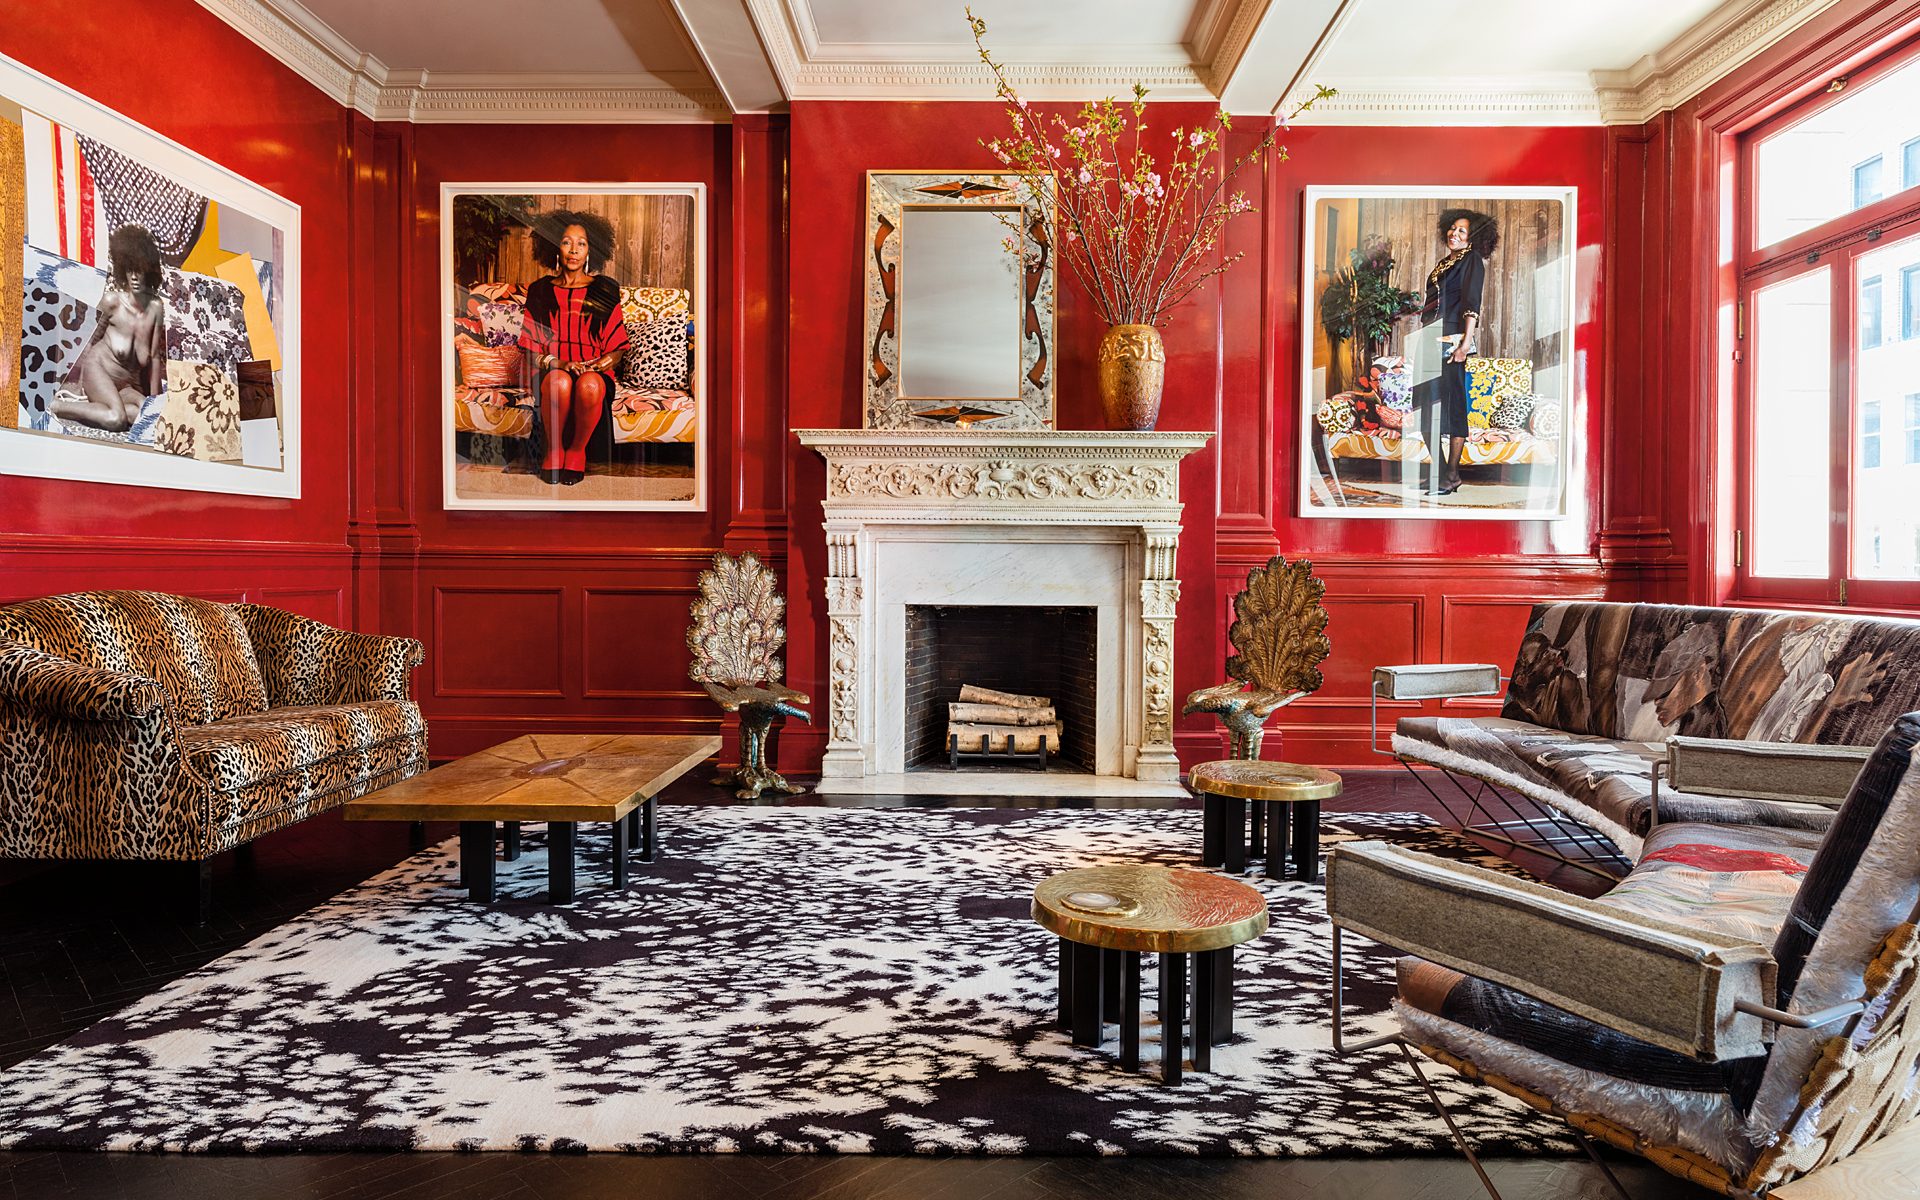 Art Meets Design in a Sophisticated Upper East Side Townhouse